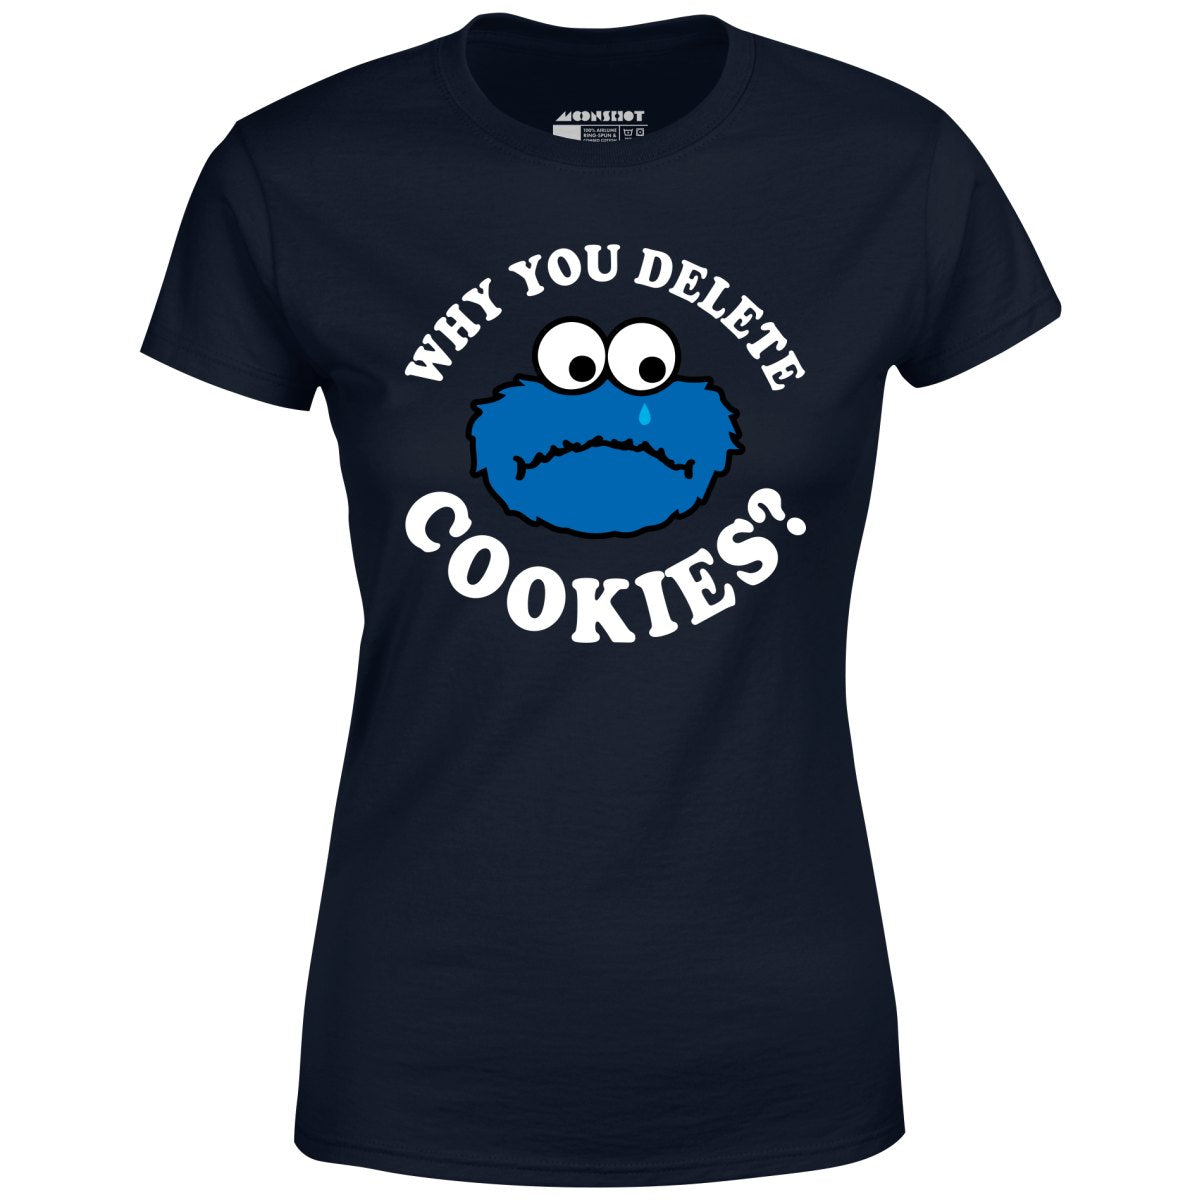 Why You Delete Cookies? - Women's T-Shirt